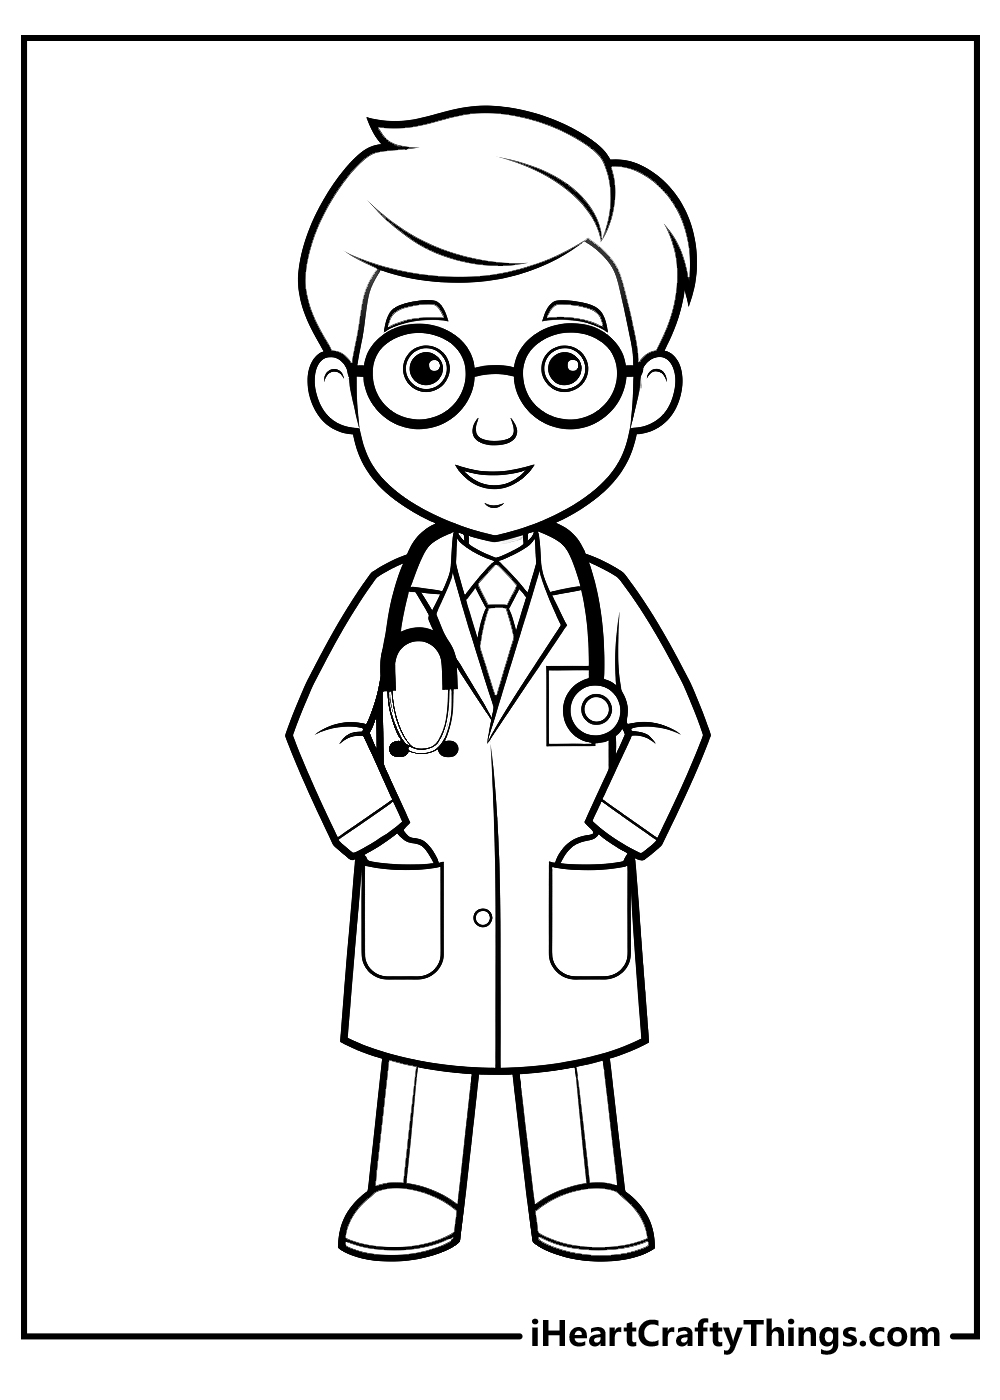 black-and-white doctor coloring pages